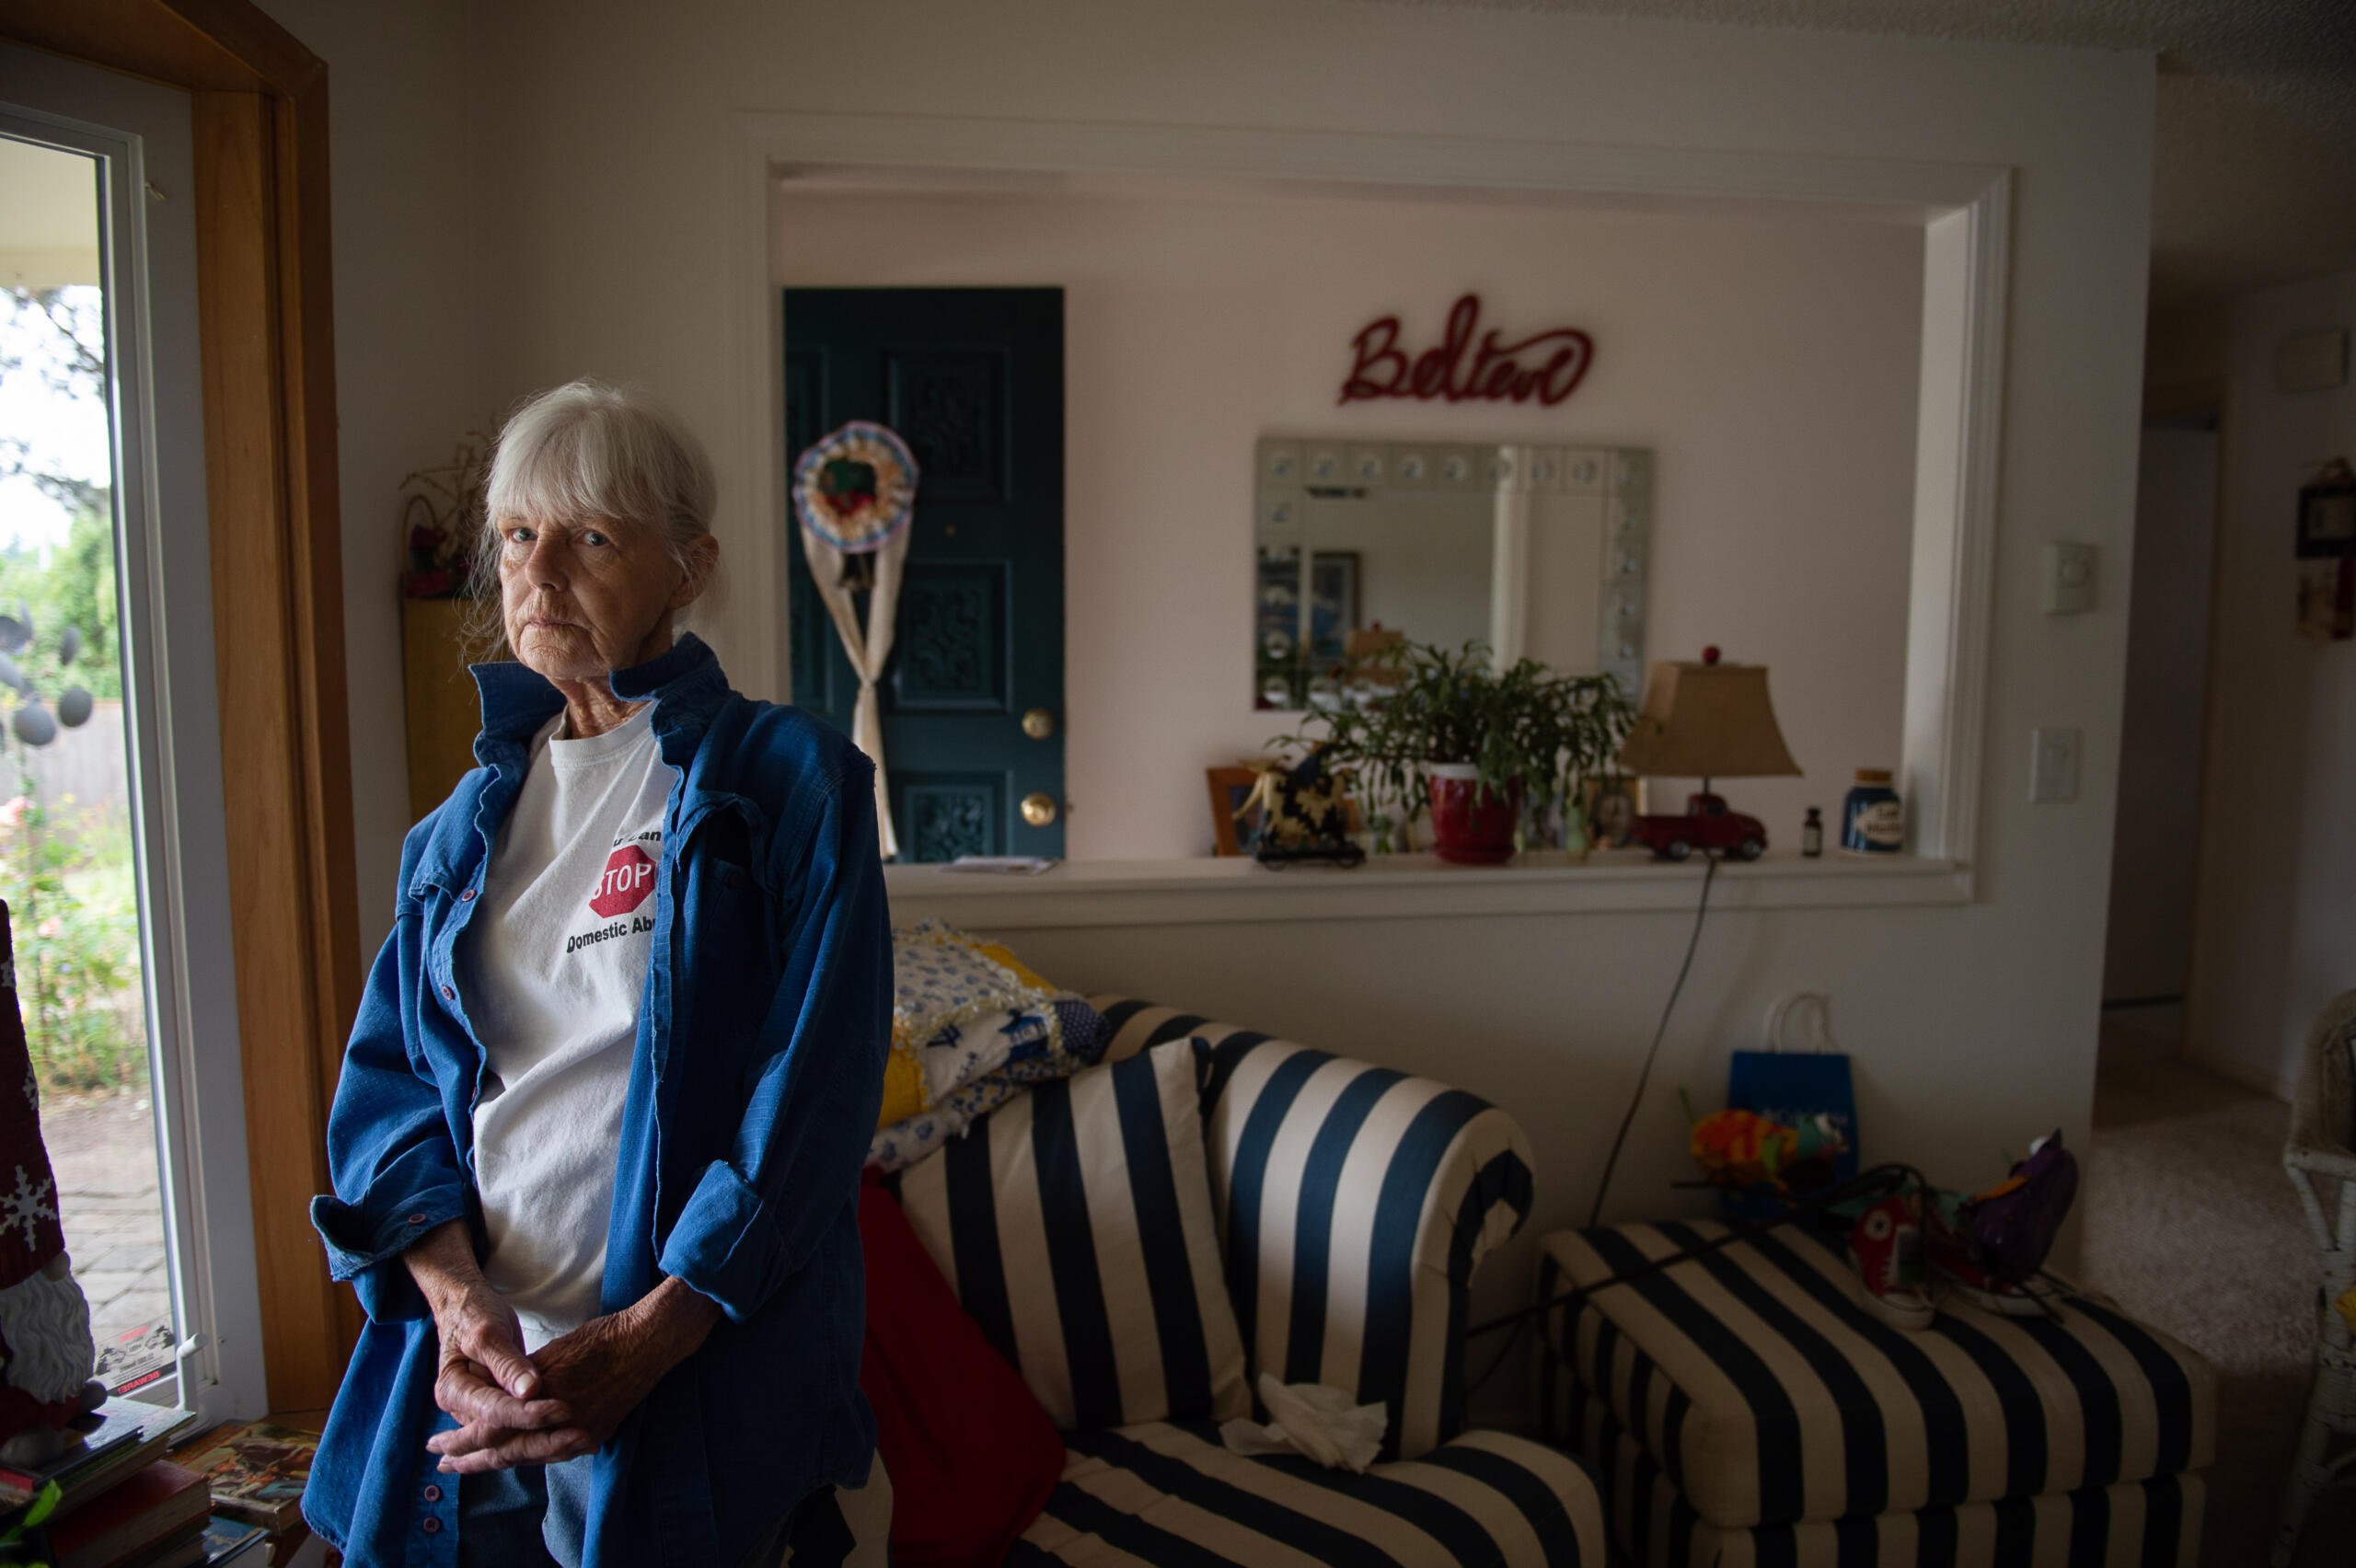 Kathleen Stevens, of Hazel Dell, is a self-proclaimed "Shelter Broker" who helps women dealing with domestic violence find safe shelter in Clark County.